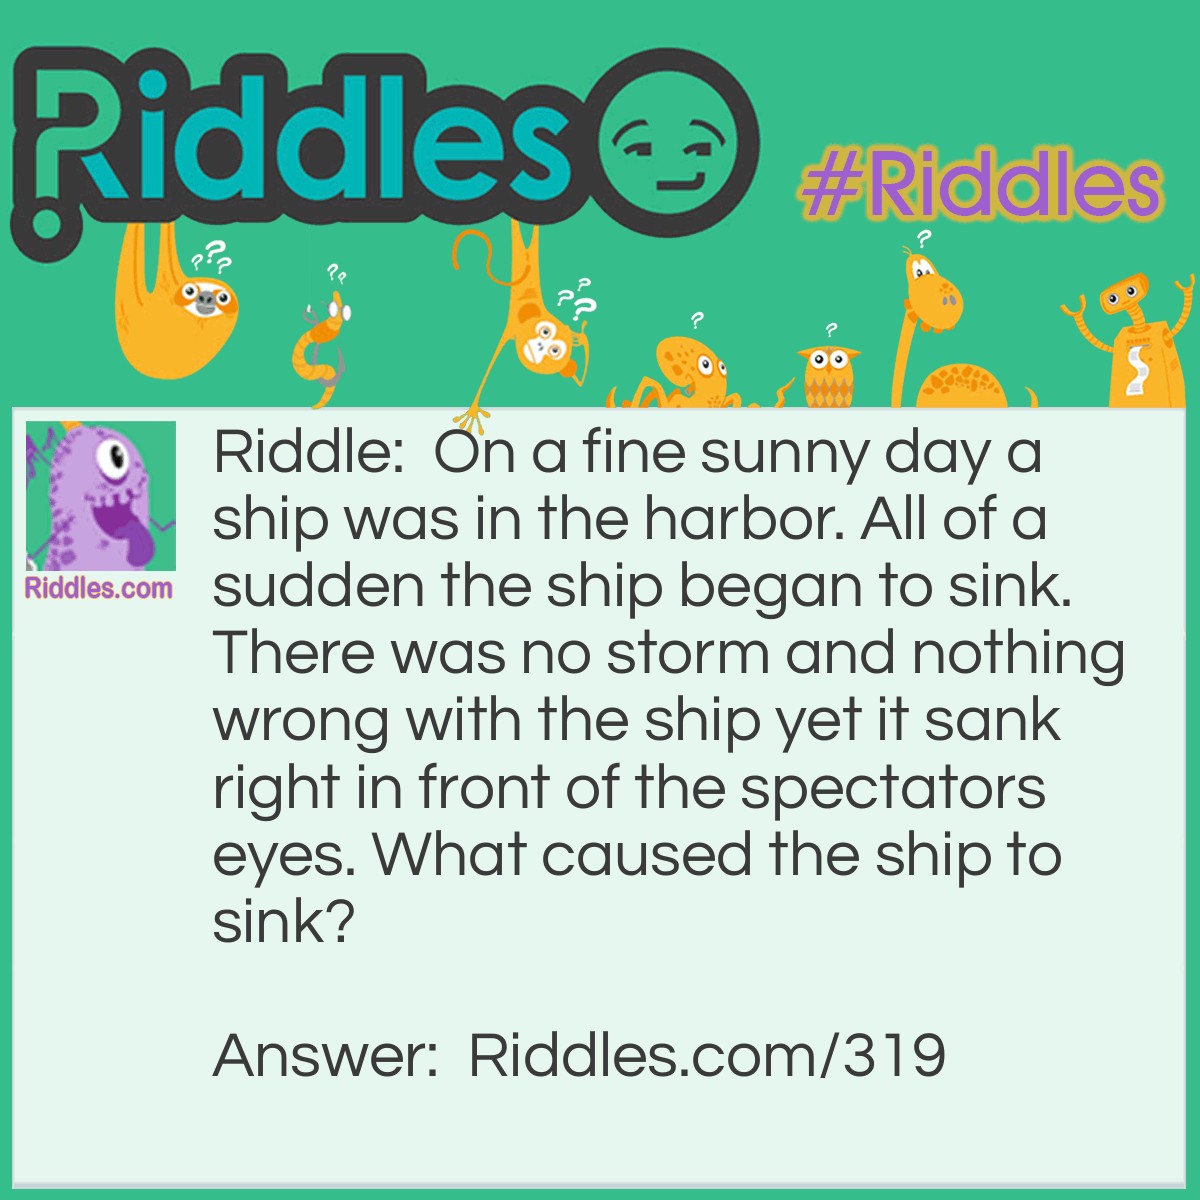 Riddle: On a fine sunny day a ship was in the harbor. All of a sudden the ship began to sink. There was no storm and nothing wrong with the ship yet it sank right in front of the spectators eyes. What caused the ship to sink? Answer: It was a Submarine.